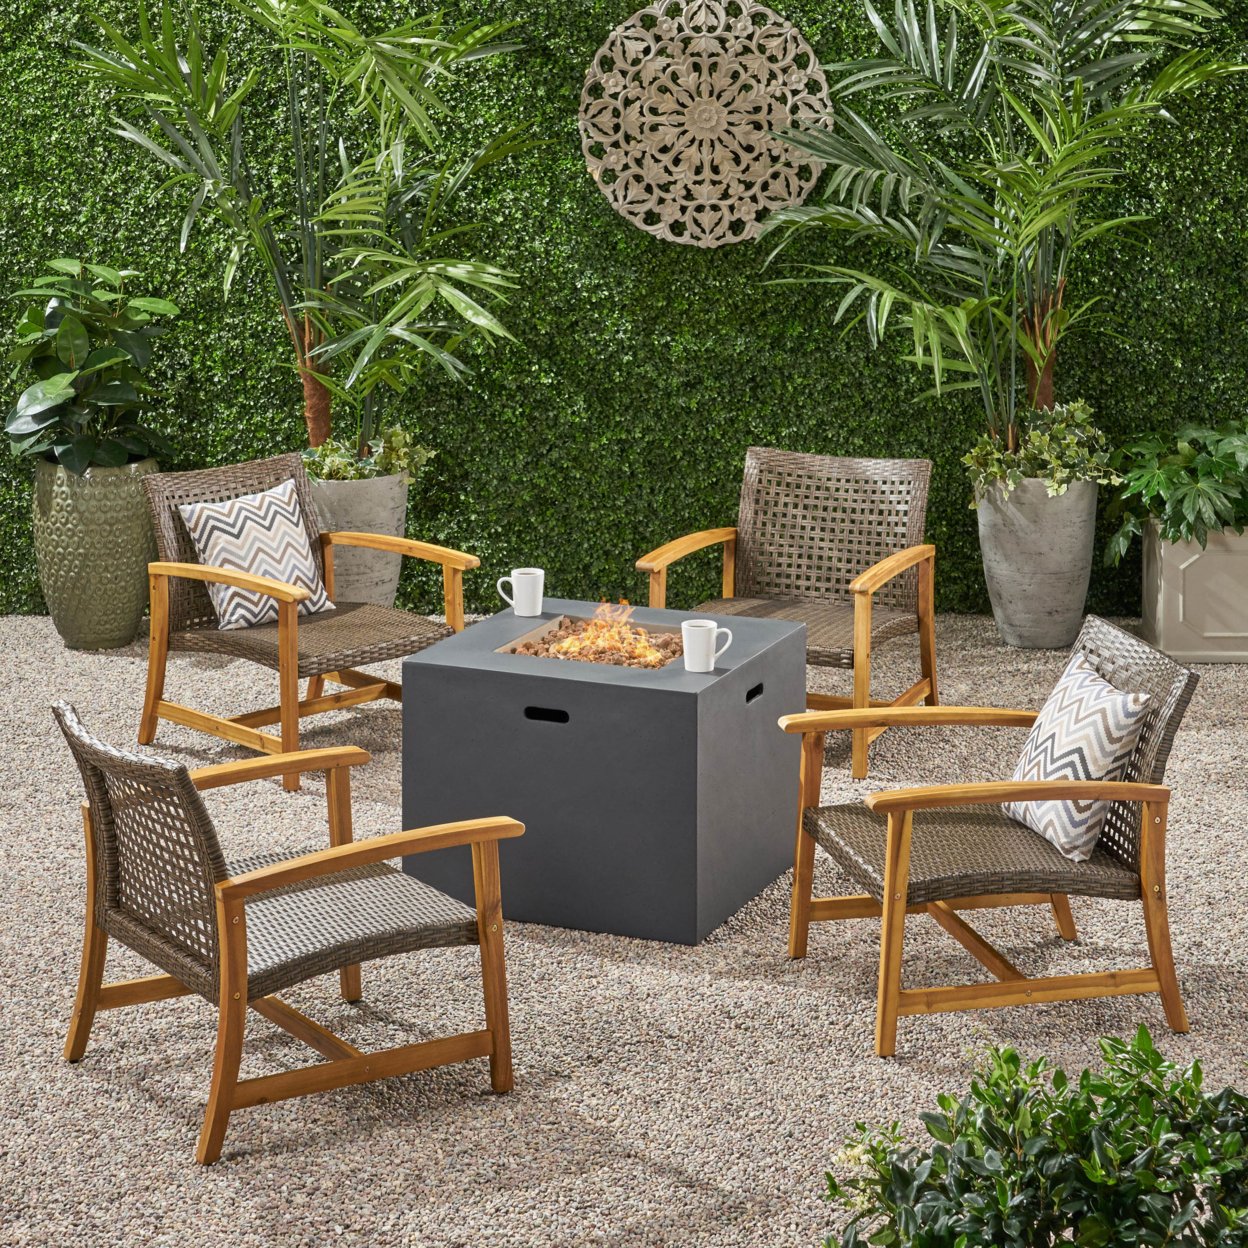 Carry Outdoor 5 Piece Wood And Wicker Club Chairs And Fire Pit Set - Mixed Mocha, Natural Finish, Dark Gray